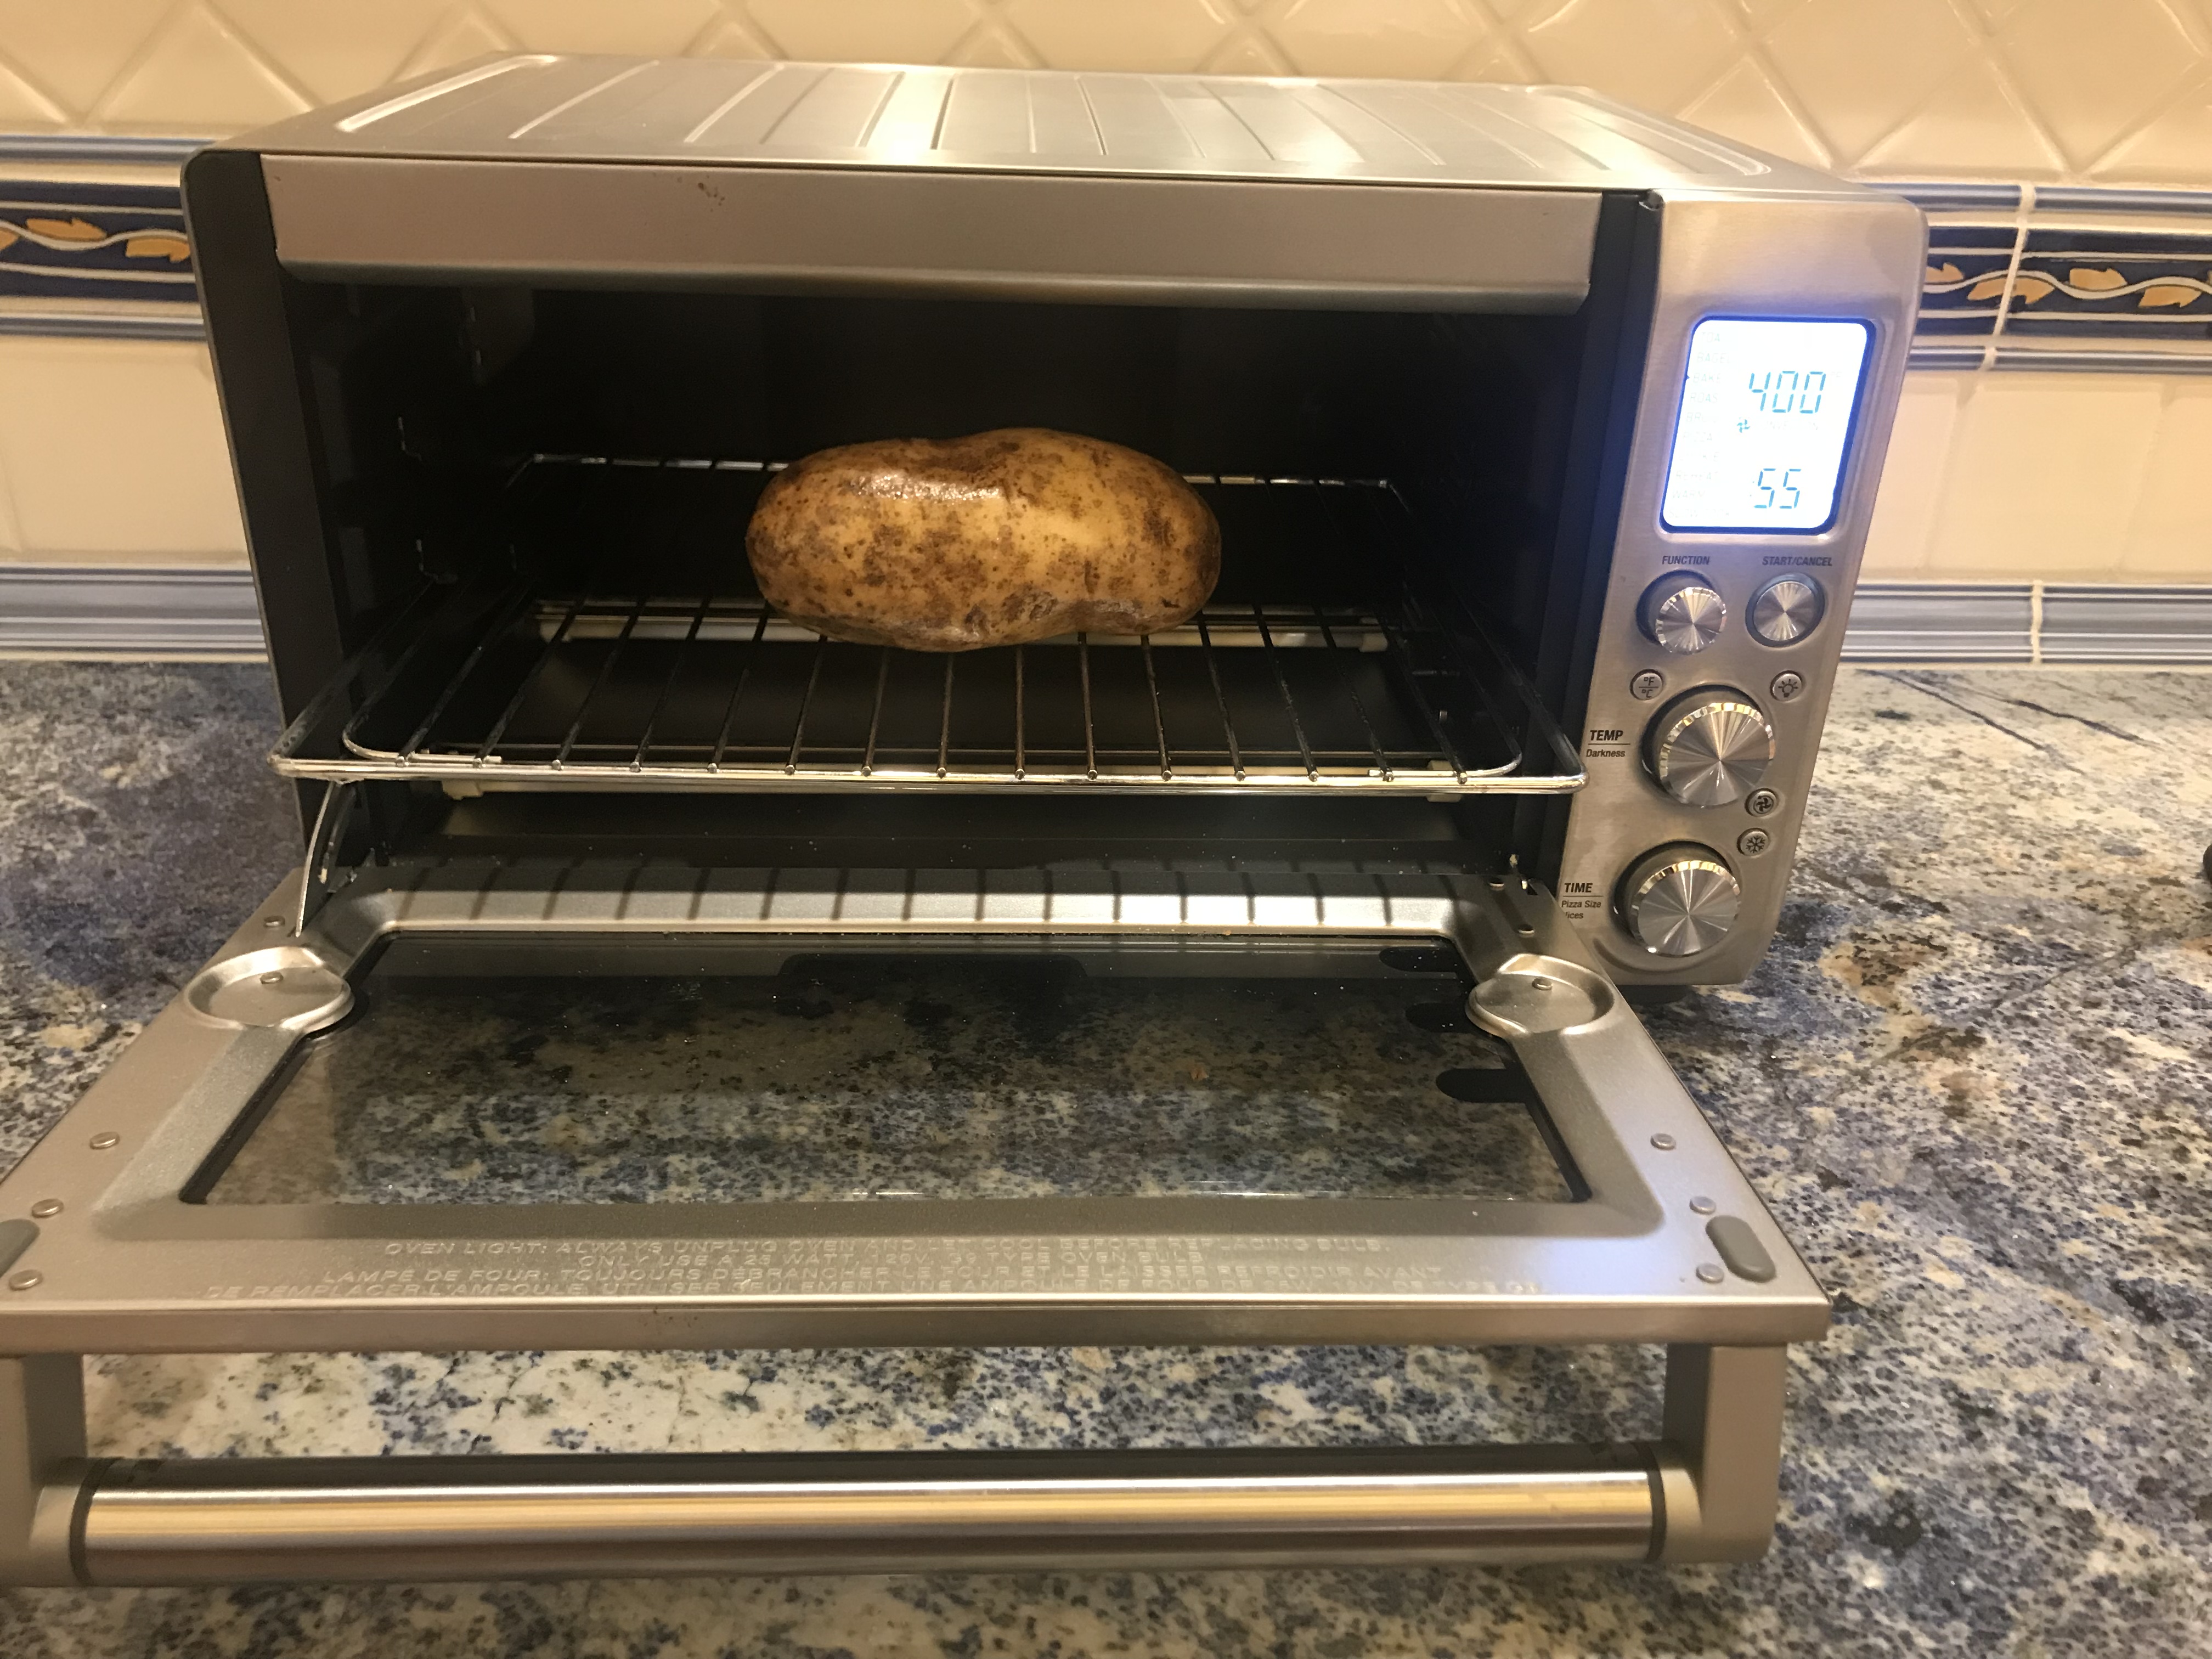 How Long To Cook Potato In Toaster Oven